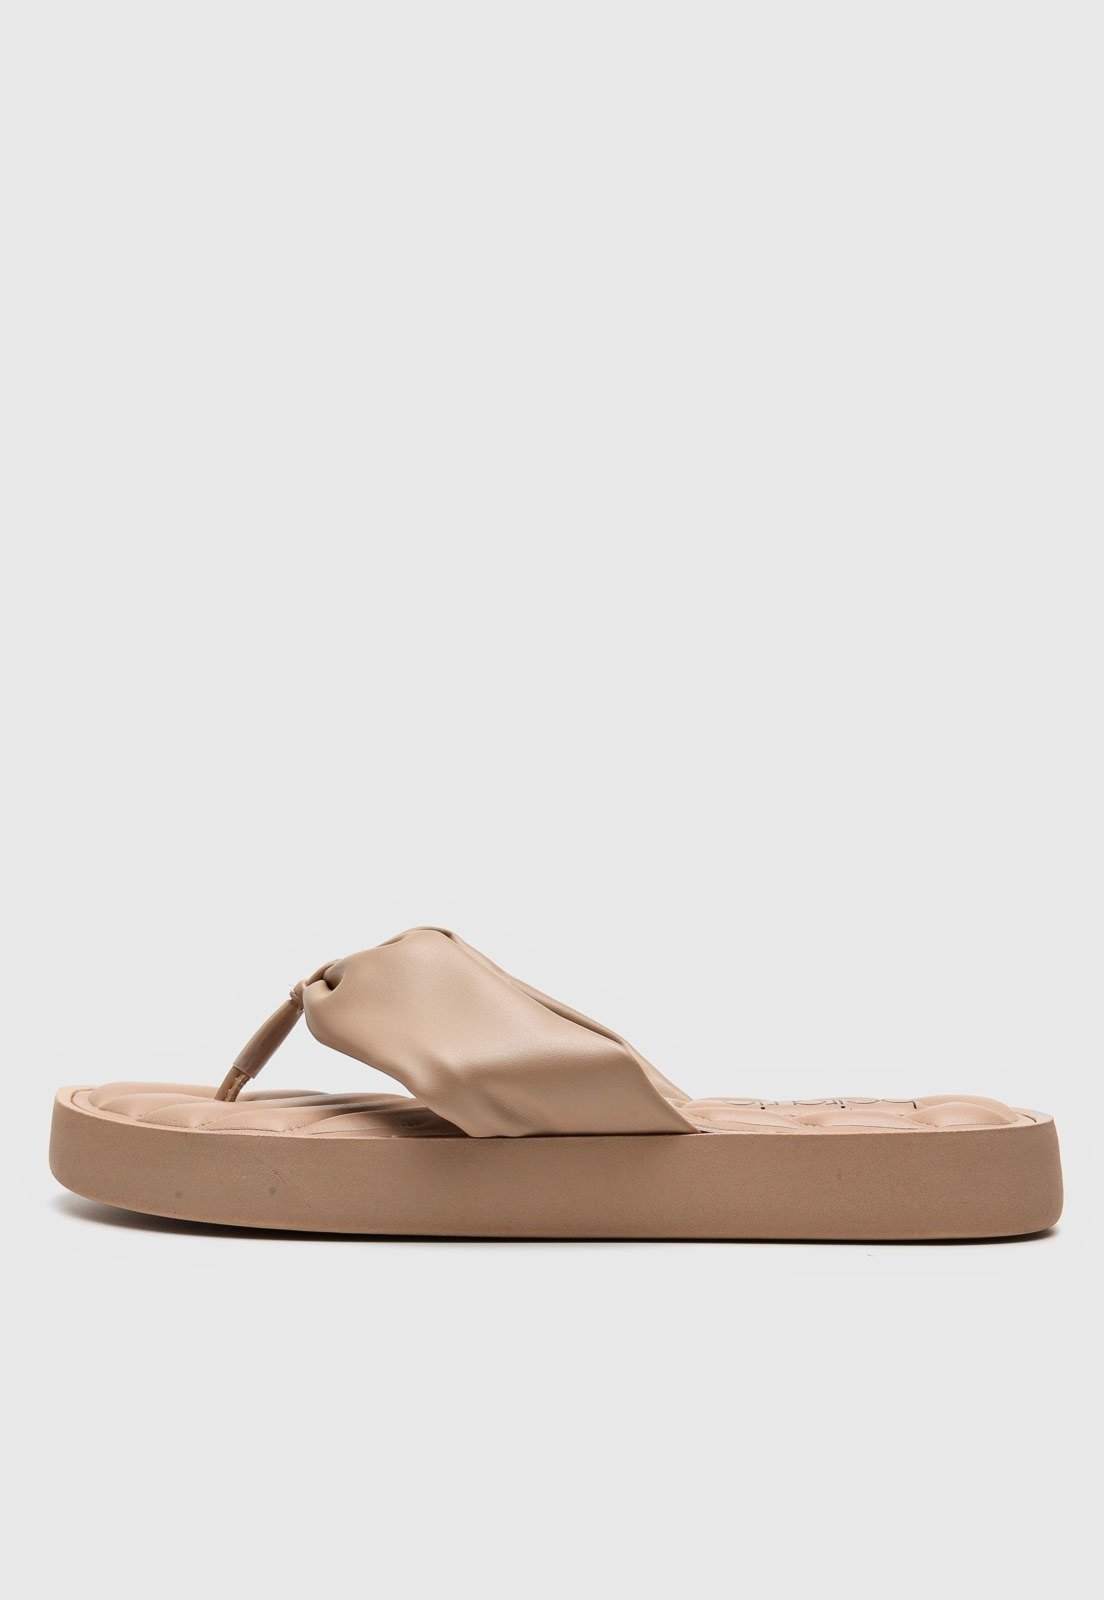 Women's Julisa Slide Sandals With a Bow - Mossimo